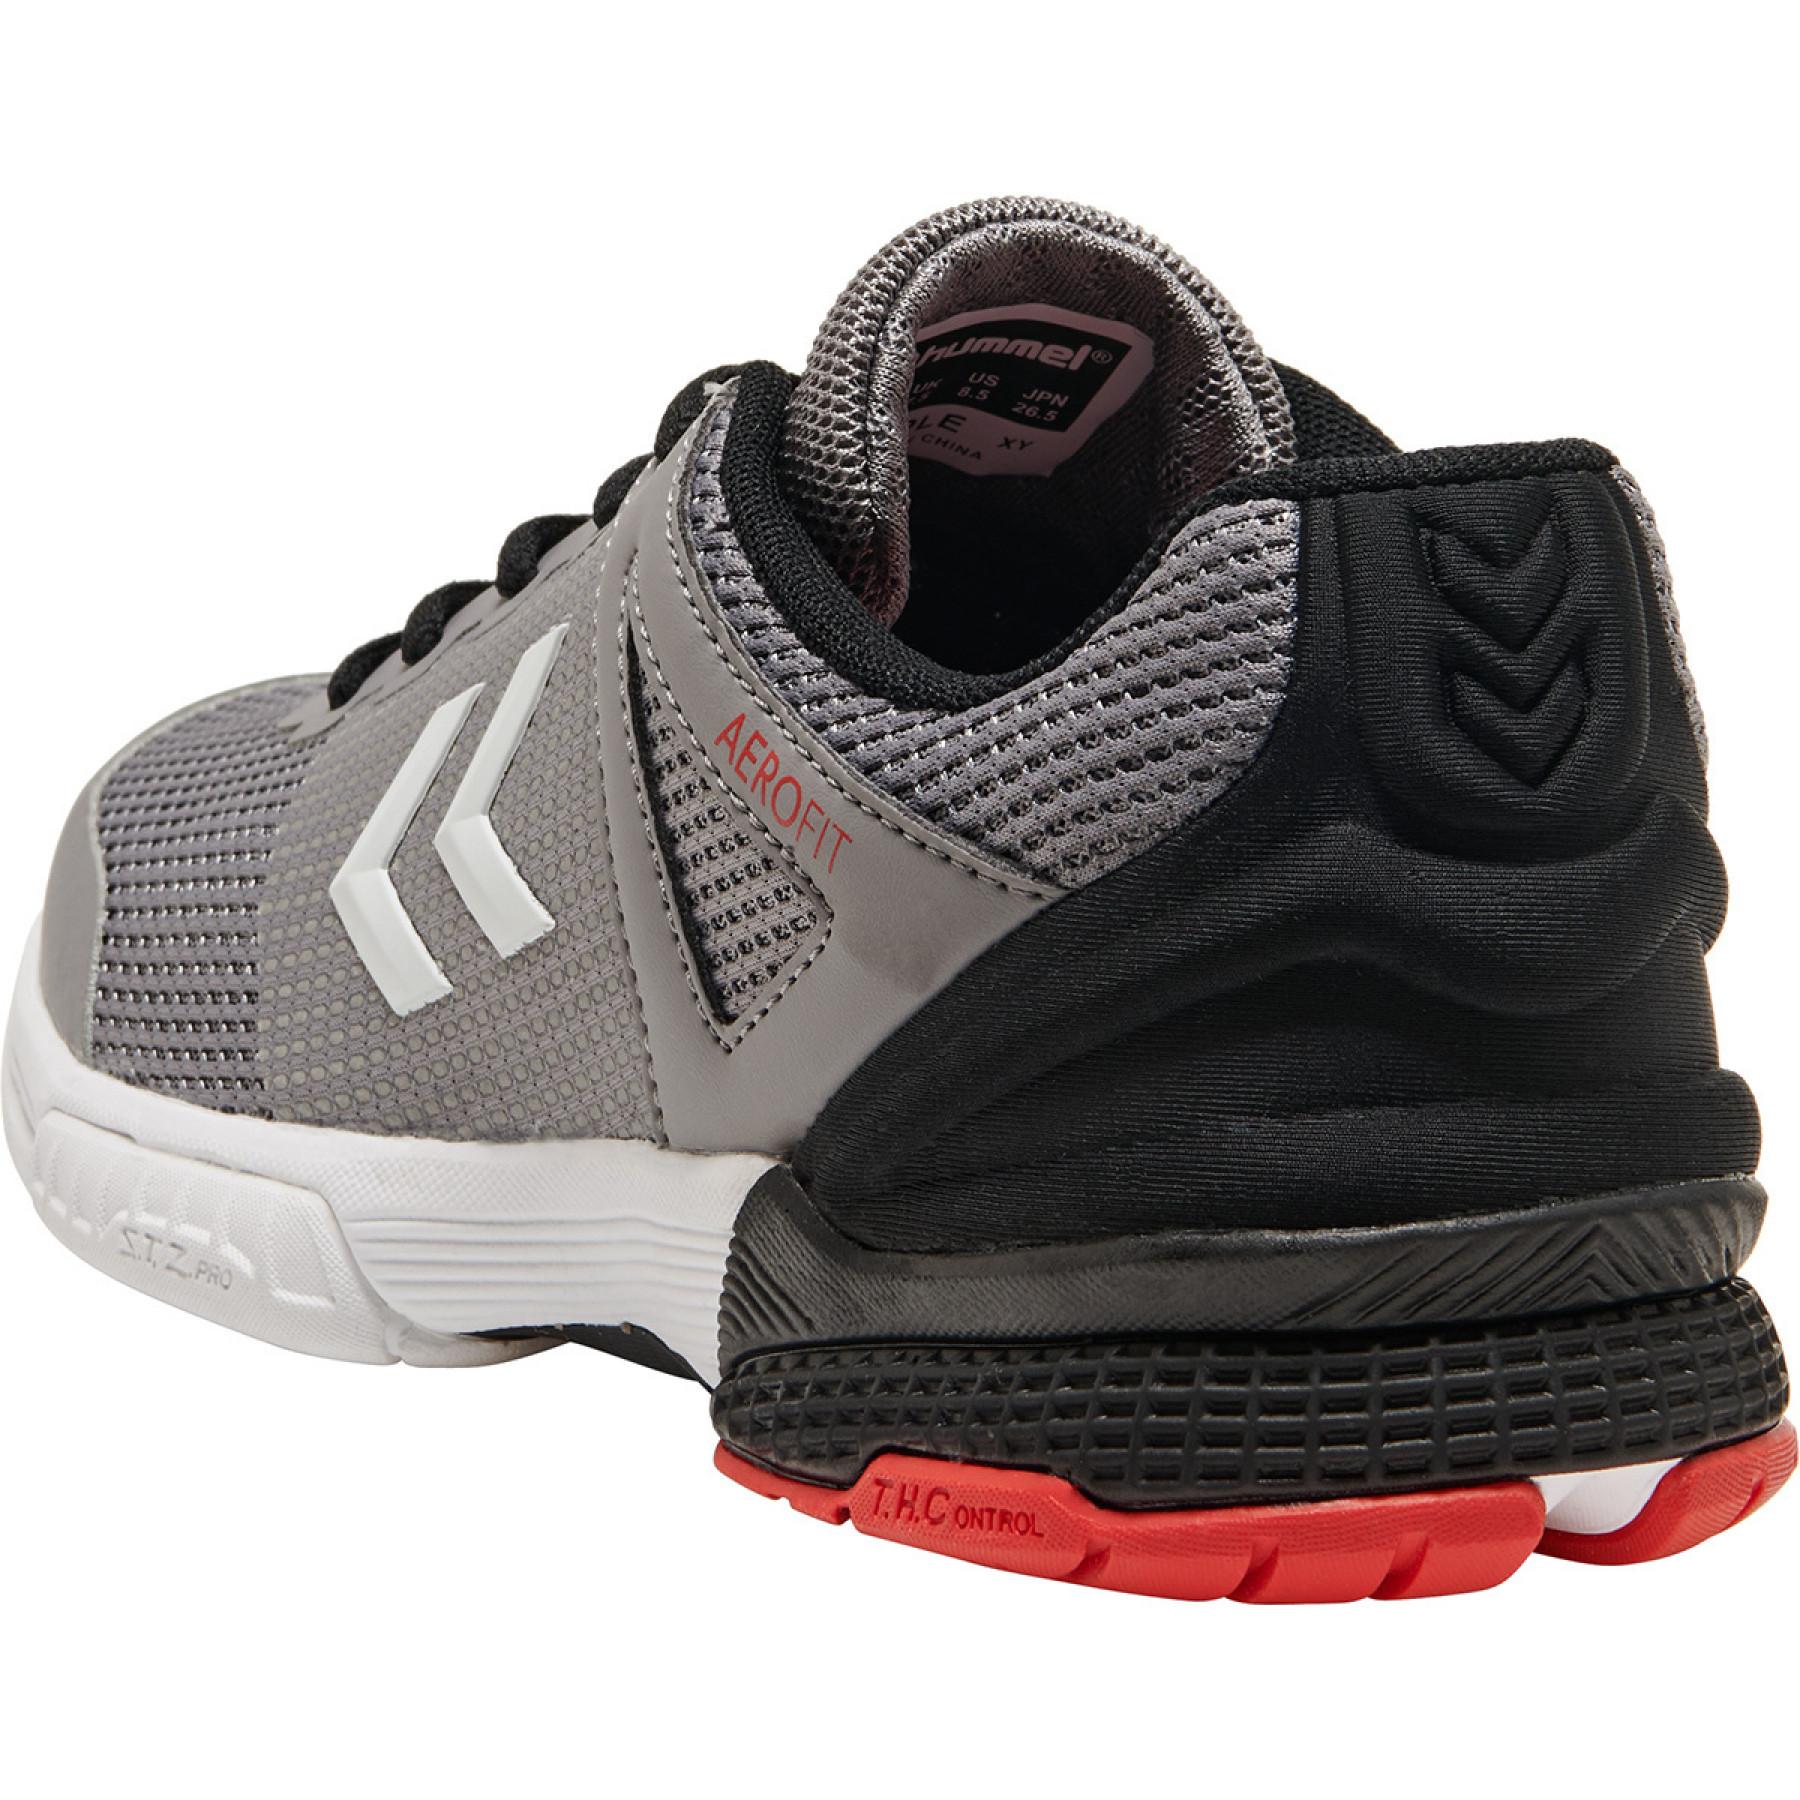 Schuhe Hummel Aerocharge Hb180 Rely 3.0 Trophy